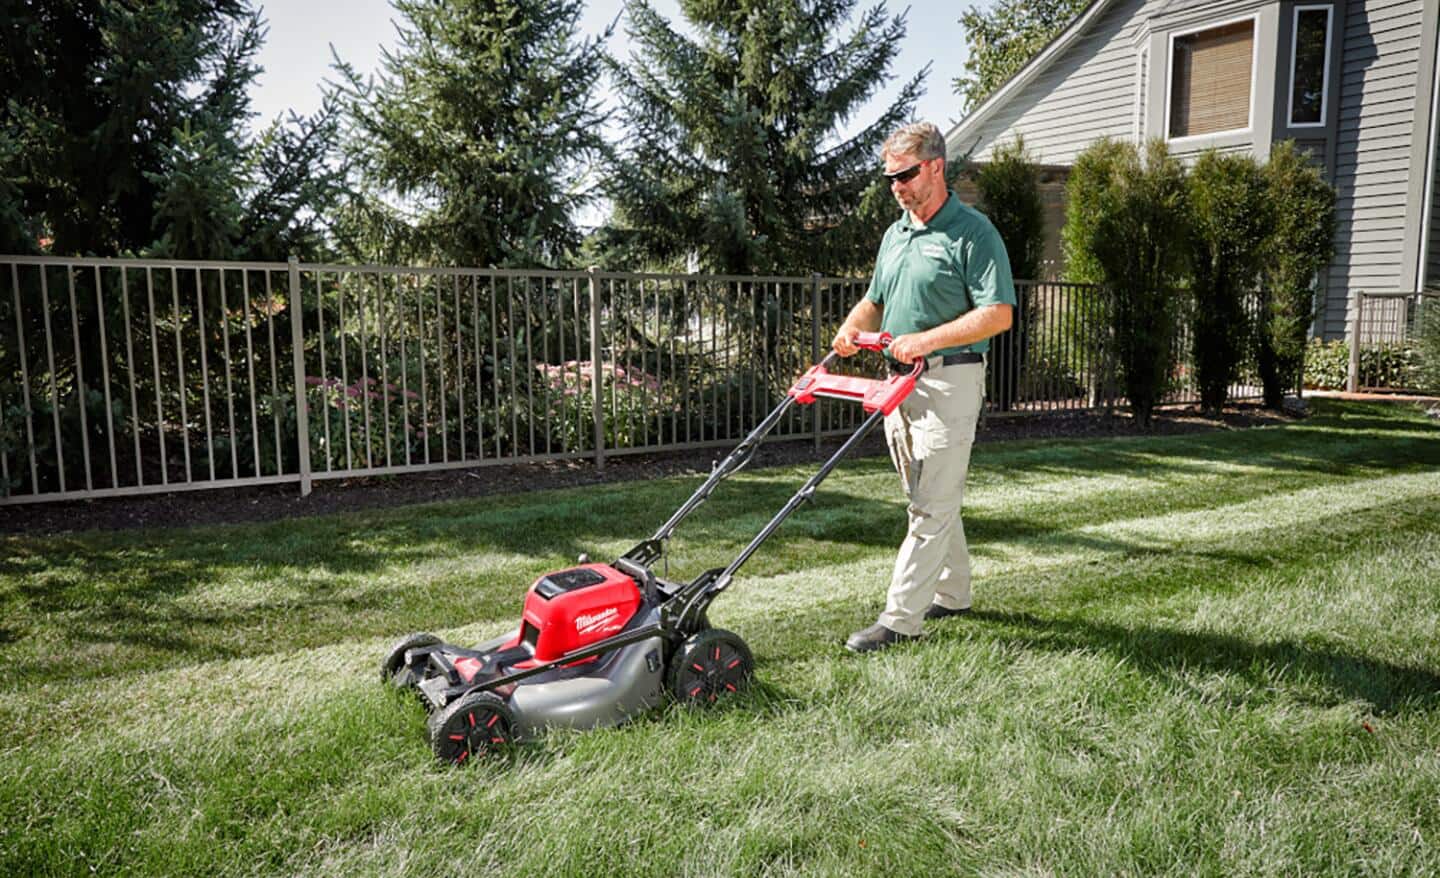 Best Self-Propelled Lawn Mowers For Your Yard - The Home Depot